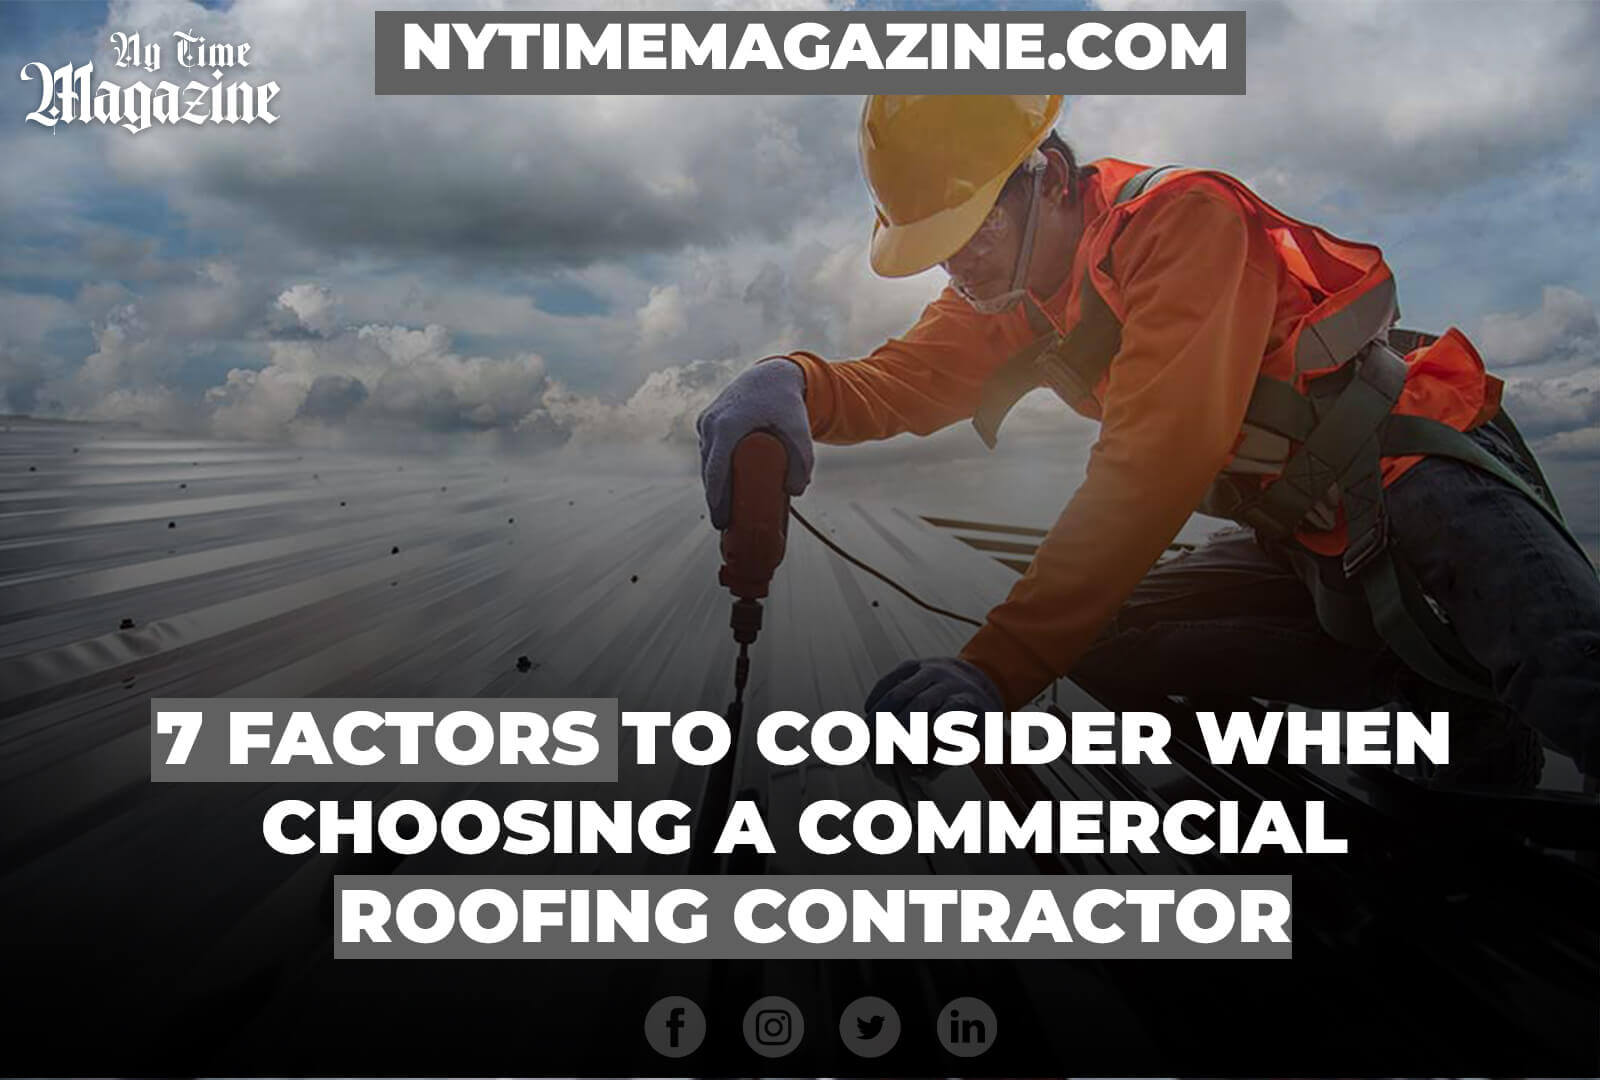 7 Factors to Consider When Choosing a Commercial Roofing Contractor